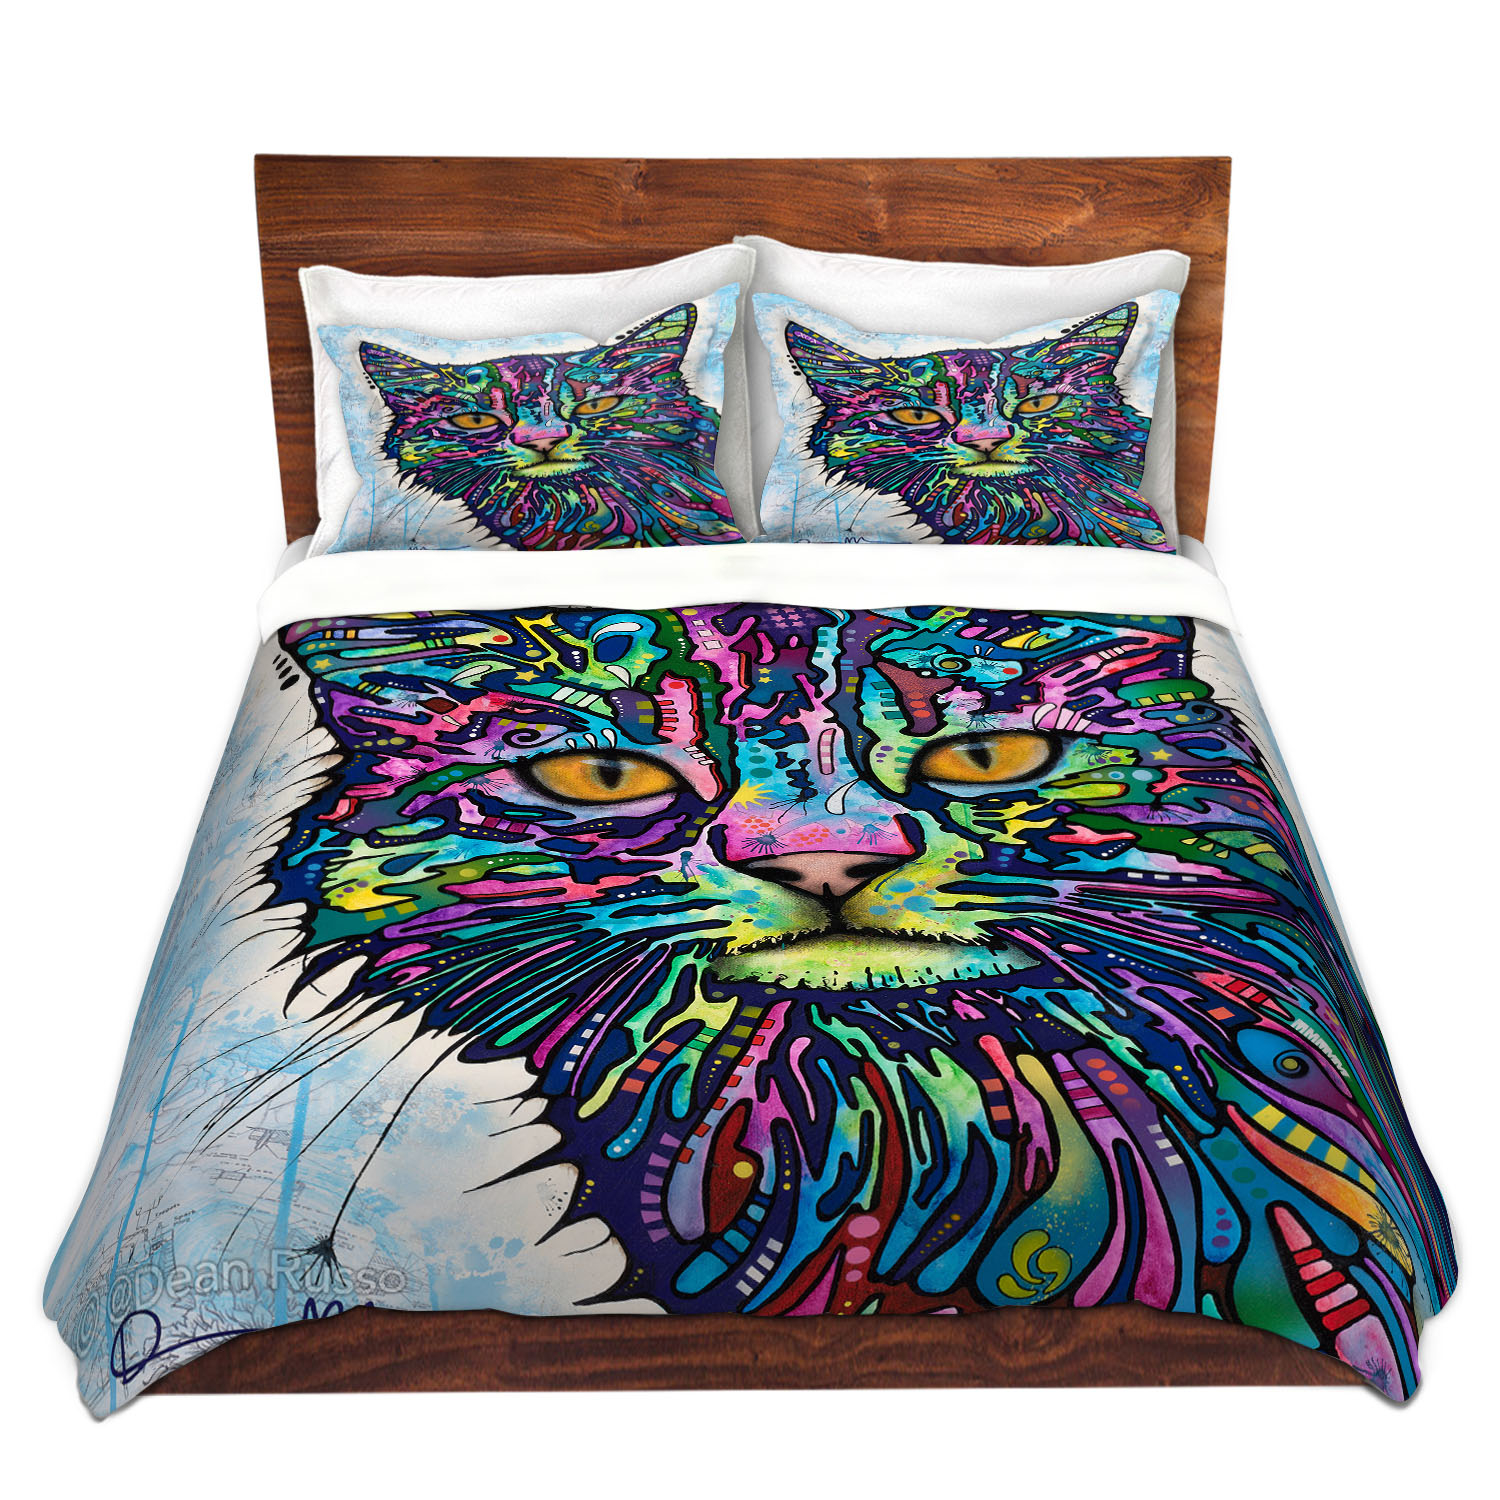 Dianoche Microfiber Duvet Covers By Dean Russo - Diligence Cat